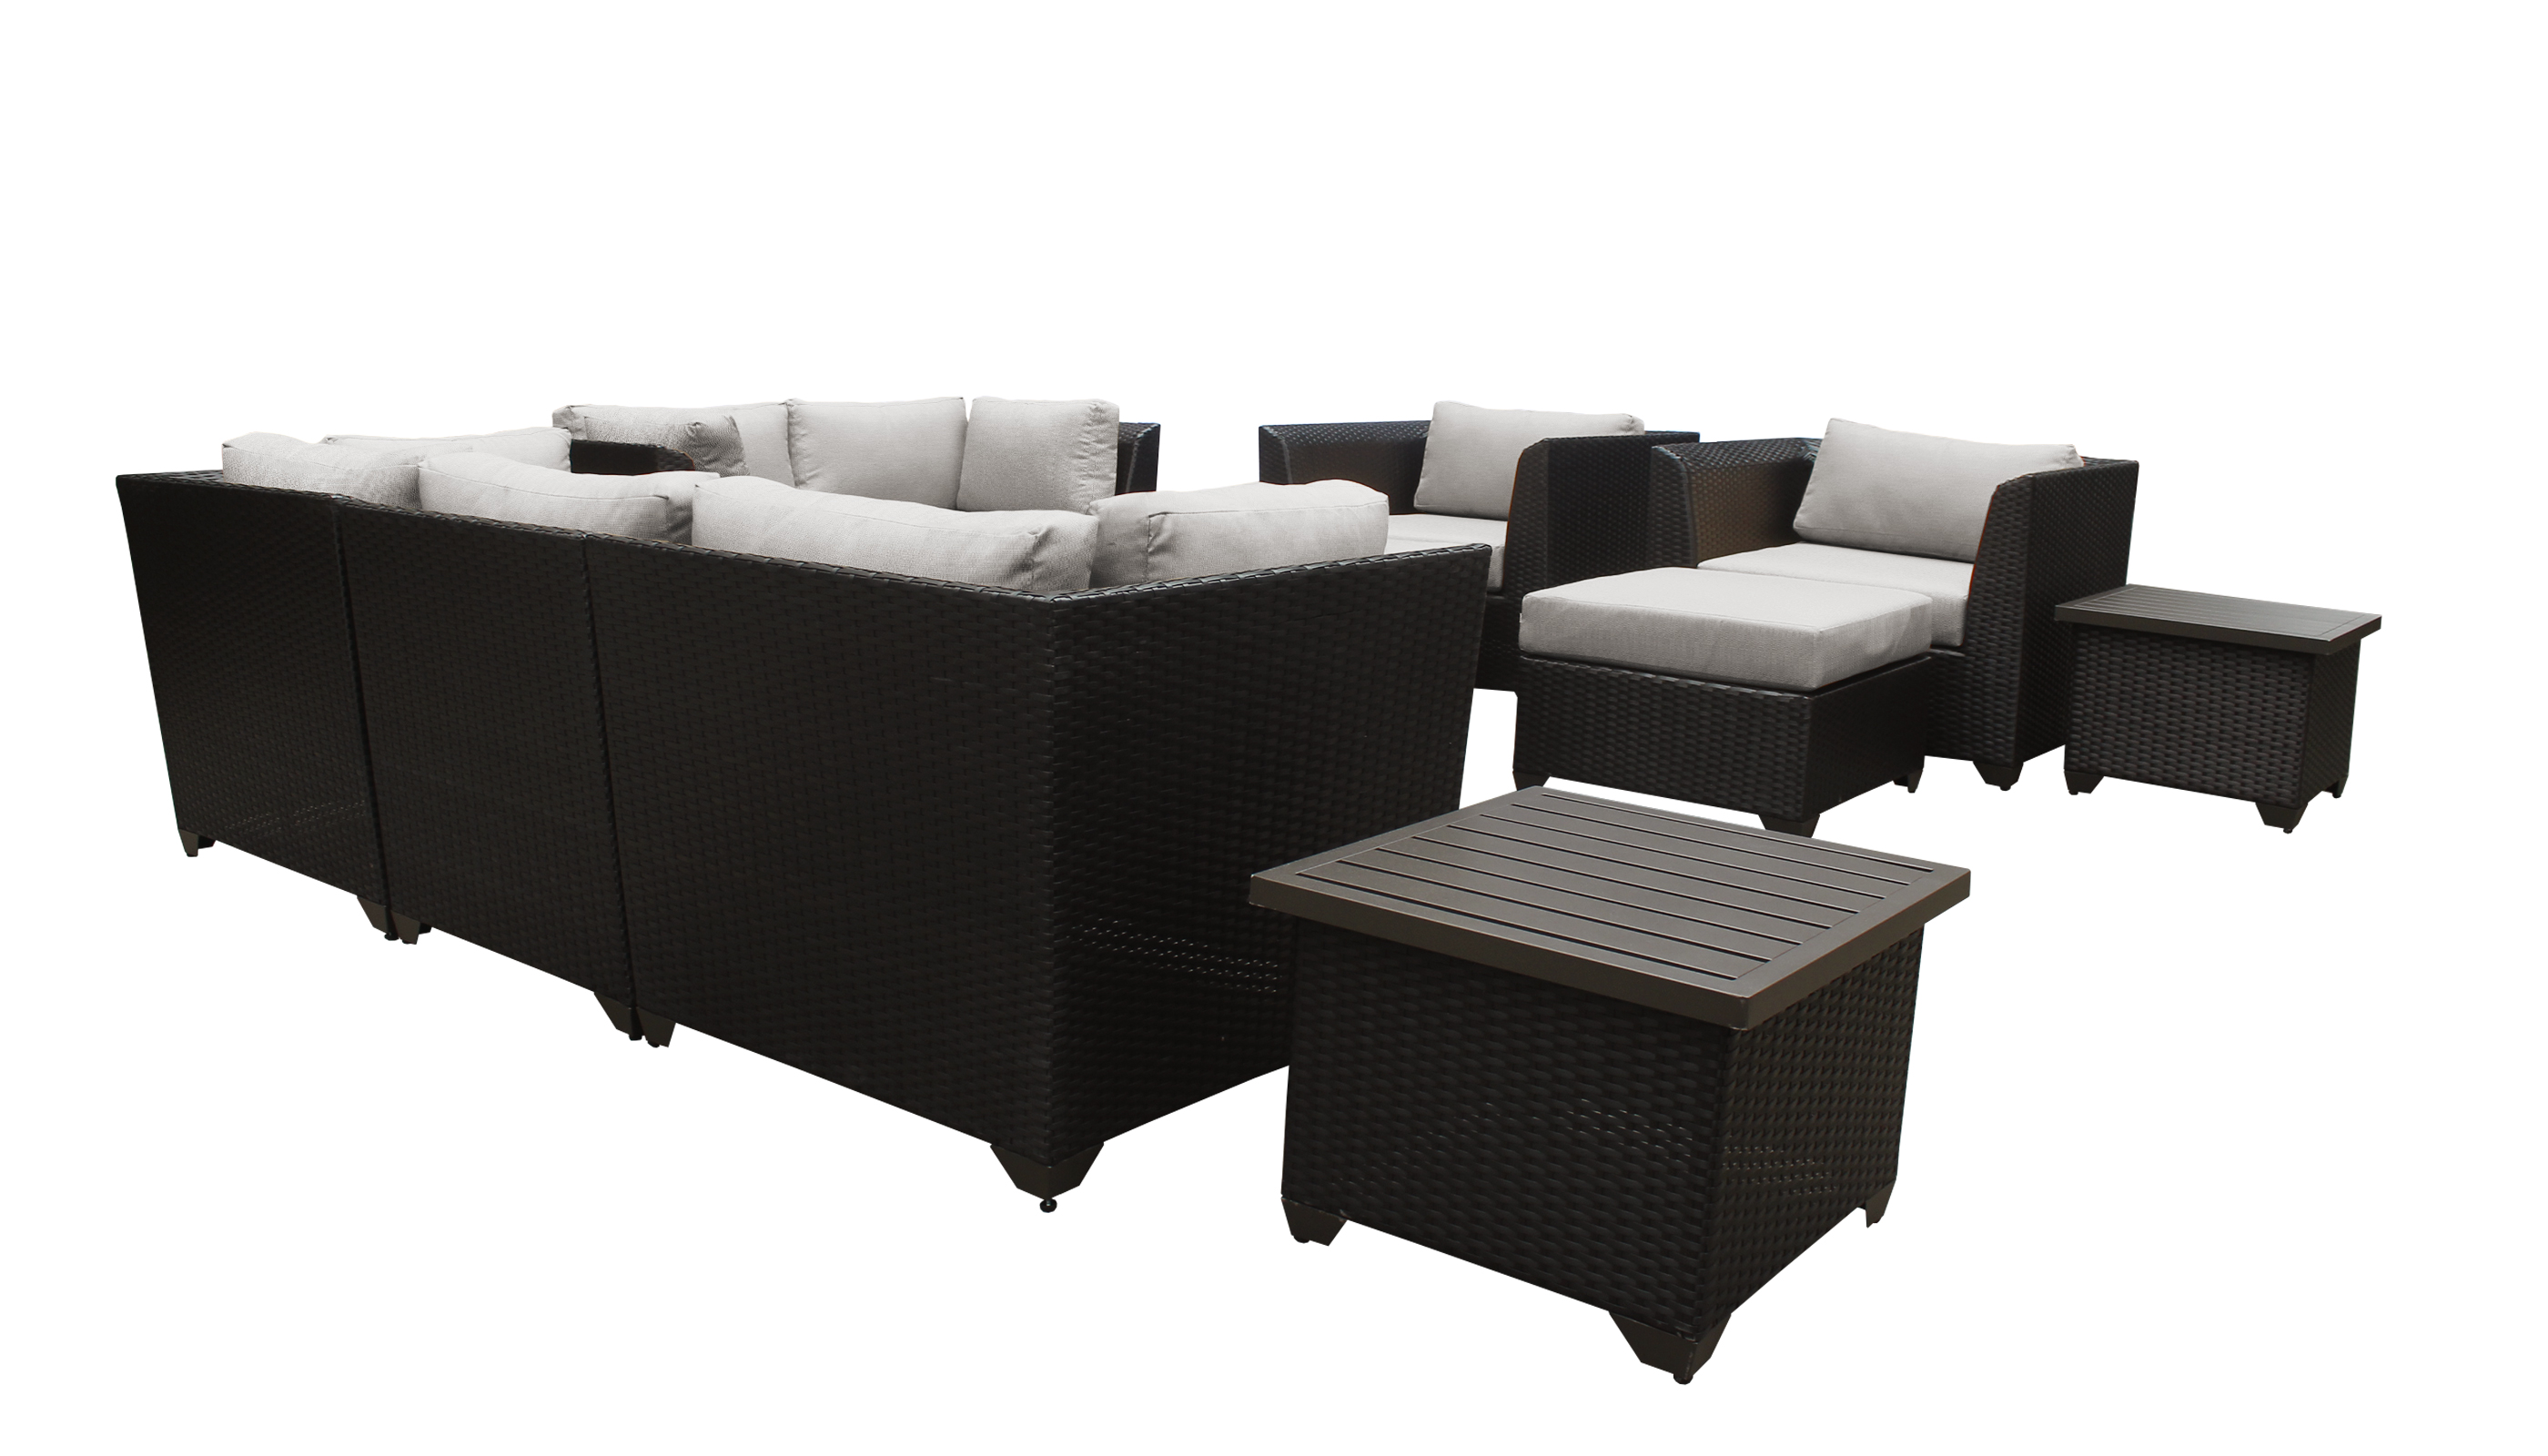 TK Classics Barbados 12 Piece Wicker Outdoor Sectional Seating Group with Storage Coffee Table and End Tables, Ash - image 2 of 11